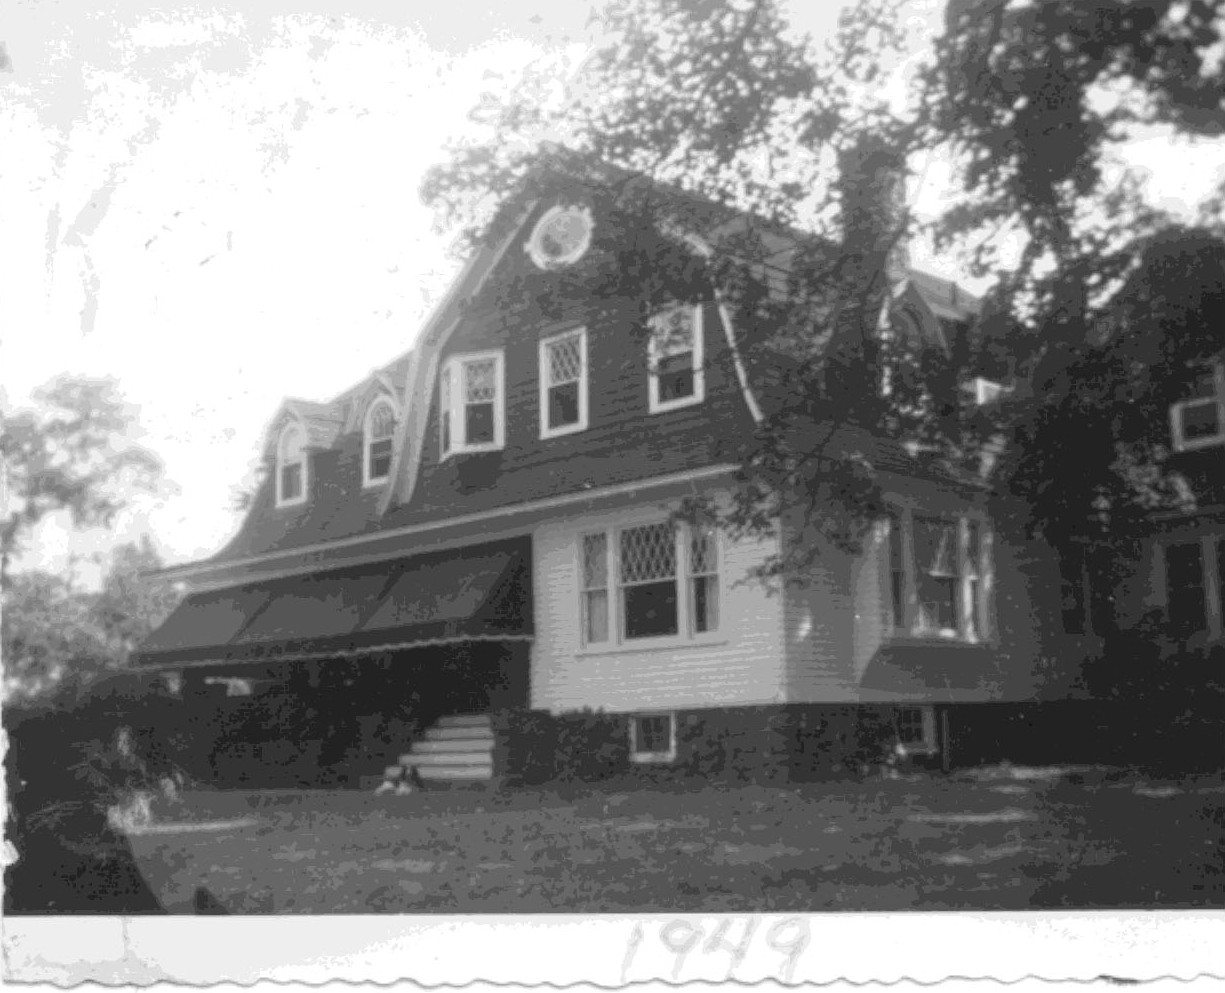 The Stoeffler House, circa 1910, photographed in 1949, that was located on the corner of Forsgate Drive and Perrineville Road.  Currently, CVS occupies the house.